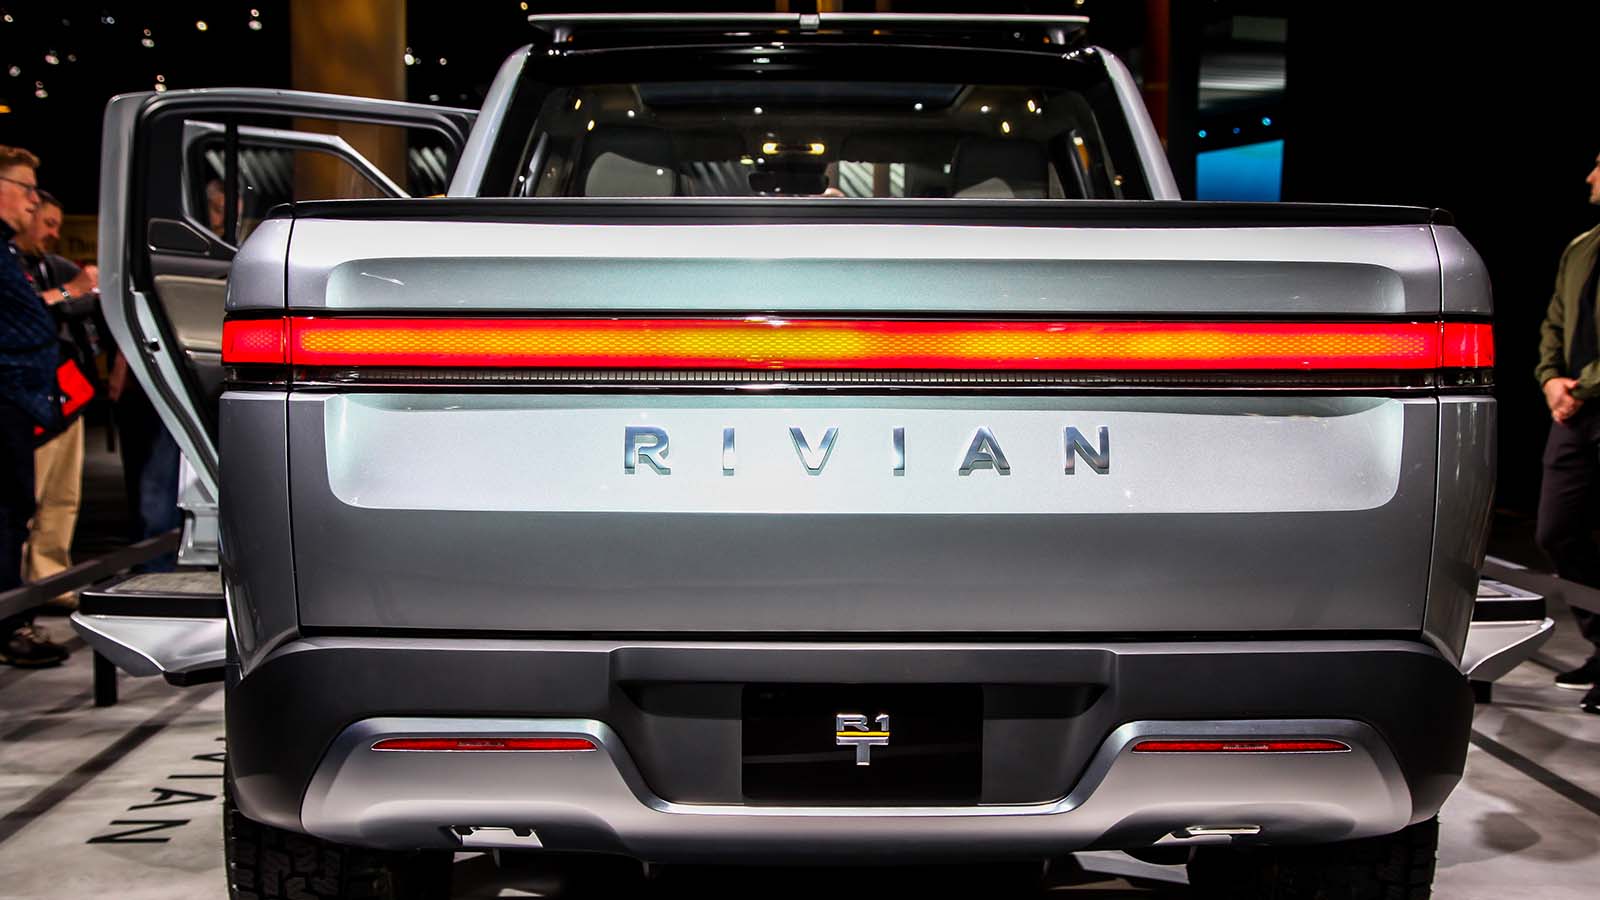 The back of a silver Rivian pick-up truck.